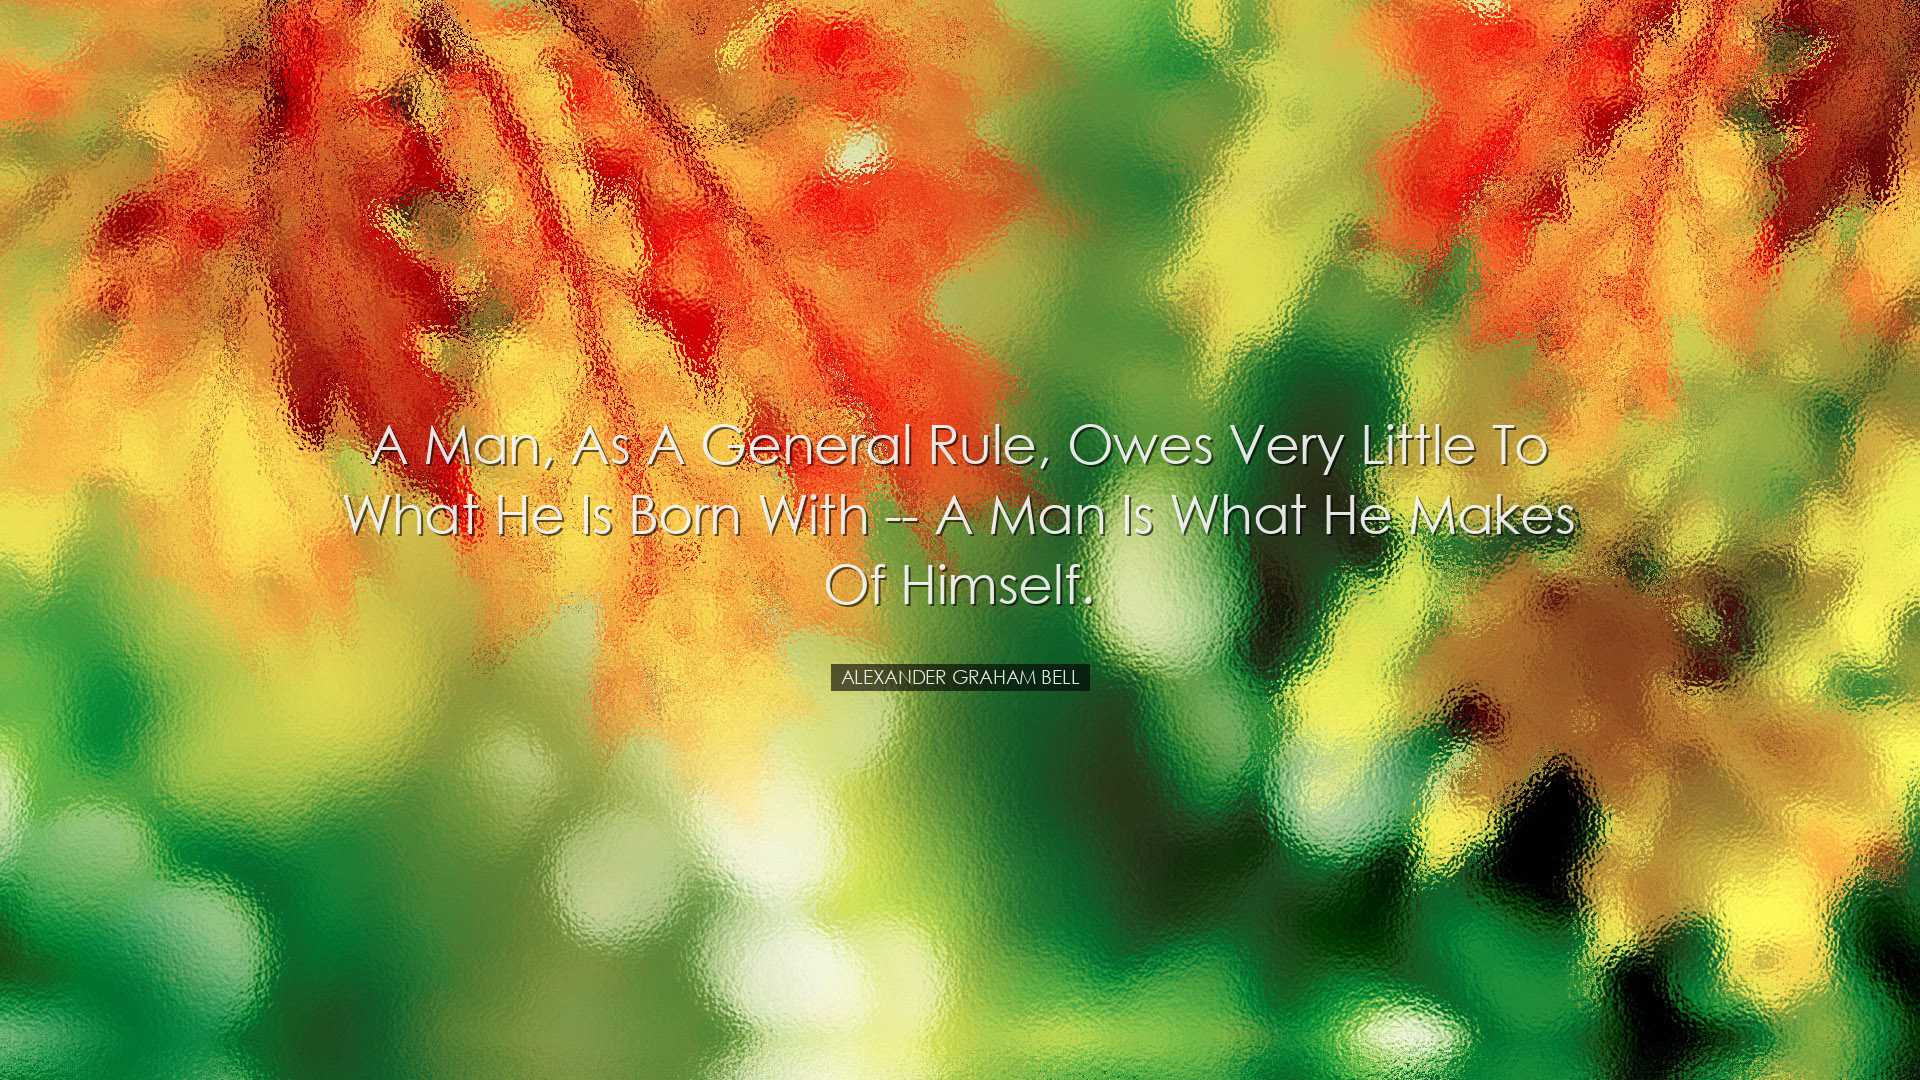 A man, as a general rule, owes very little to what he is born with